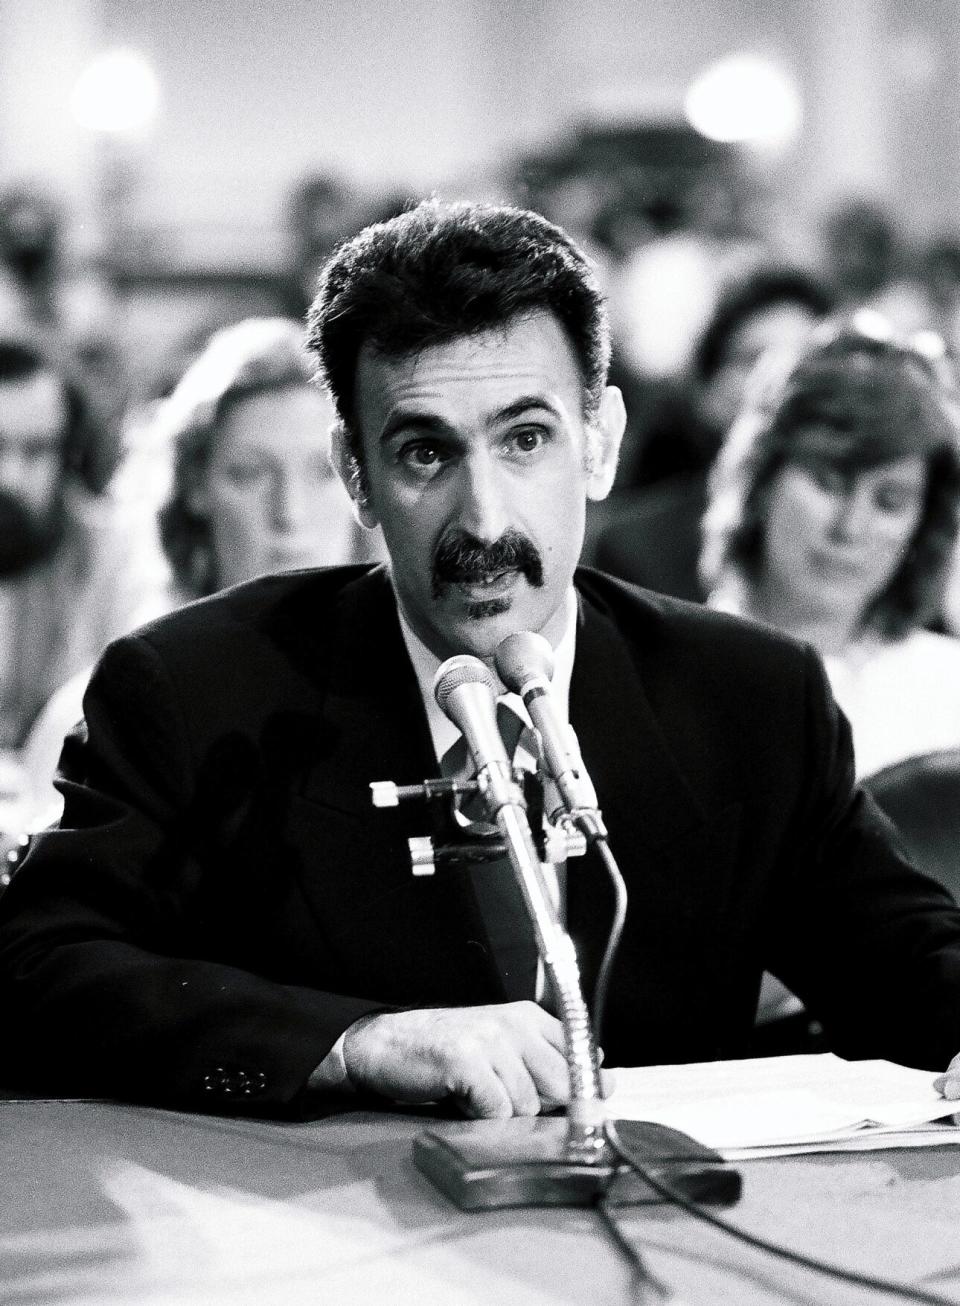 Frank Zappa appears at the PMRC senate hearing September 19, 1985. (Credit: Mark Weiss/Getty Images)